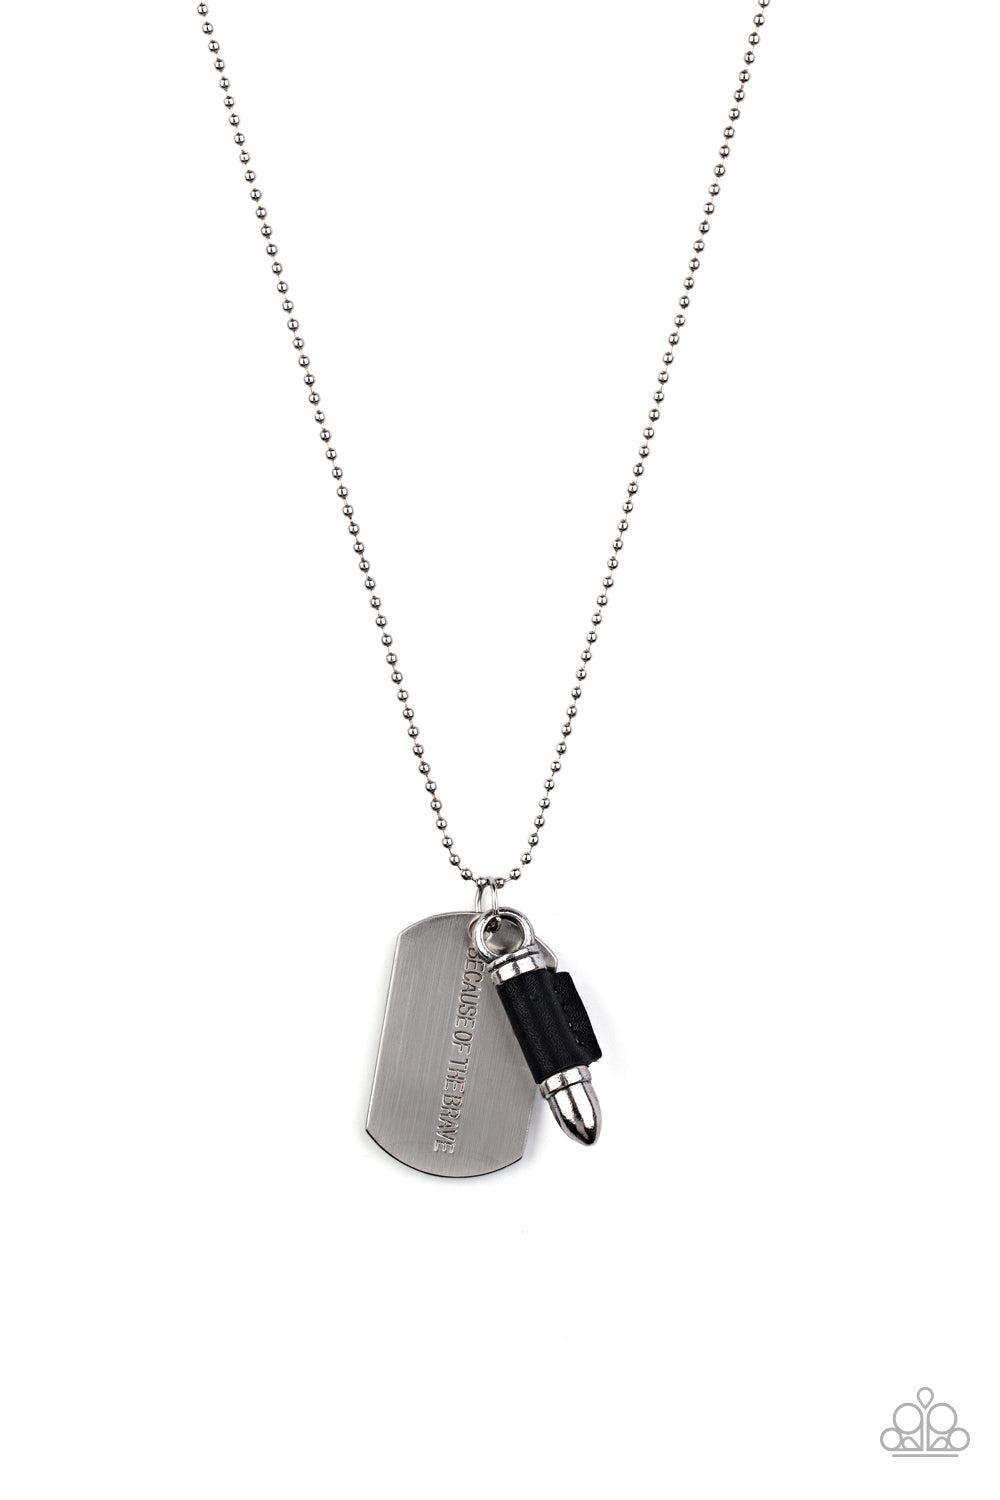 Proud Patriot Black &amp; Silver Bullet Necklace - Paparazzi Accessories- lightbox - CarasShop.com - $5 Jewelry by Cara Jewels